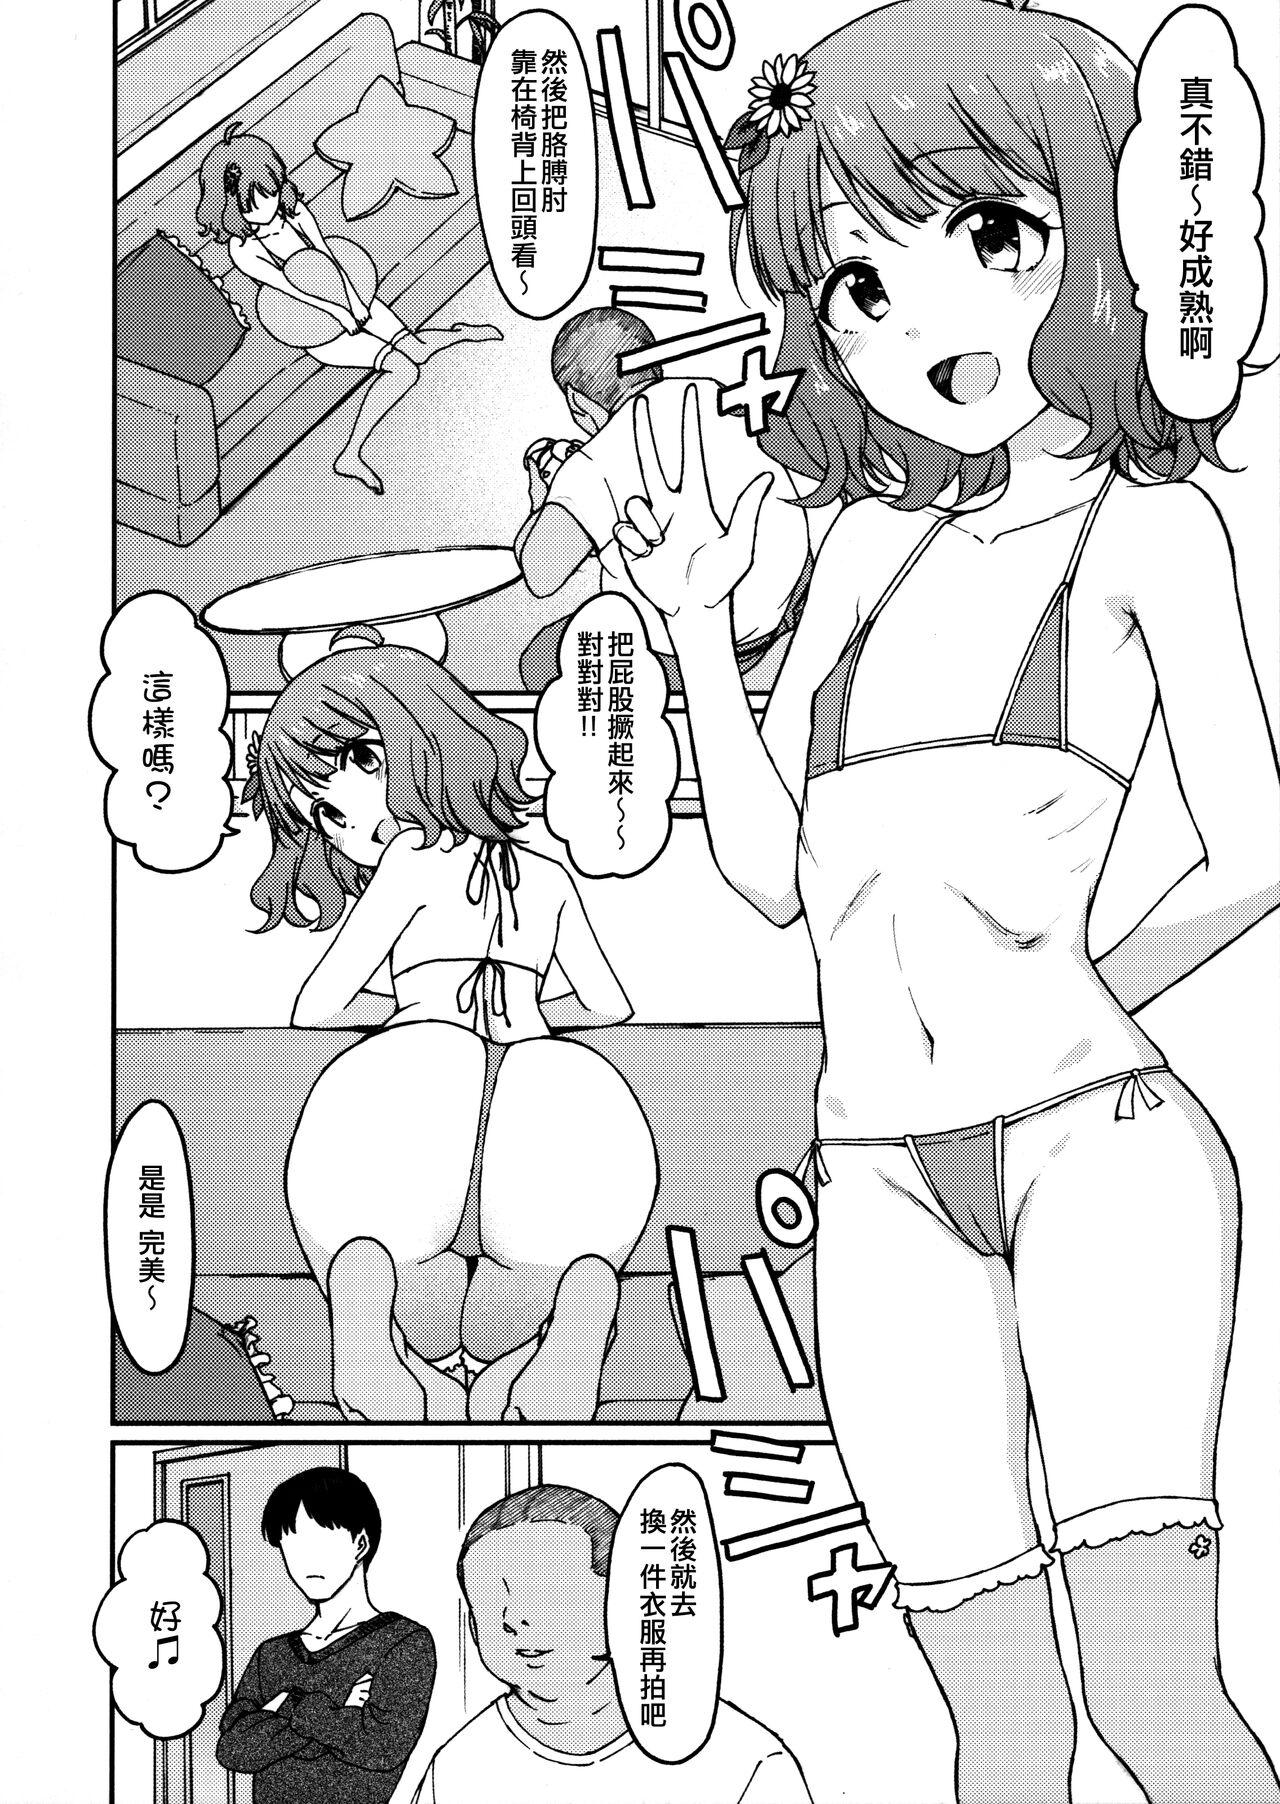 Delicia Candy Wrapper - The idolmaster Old Man - Page 5